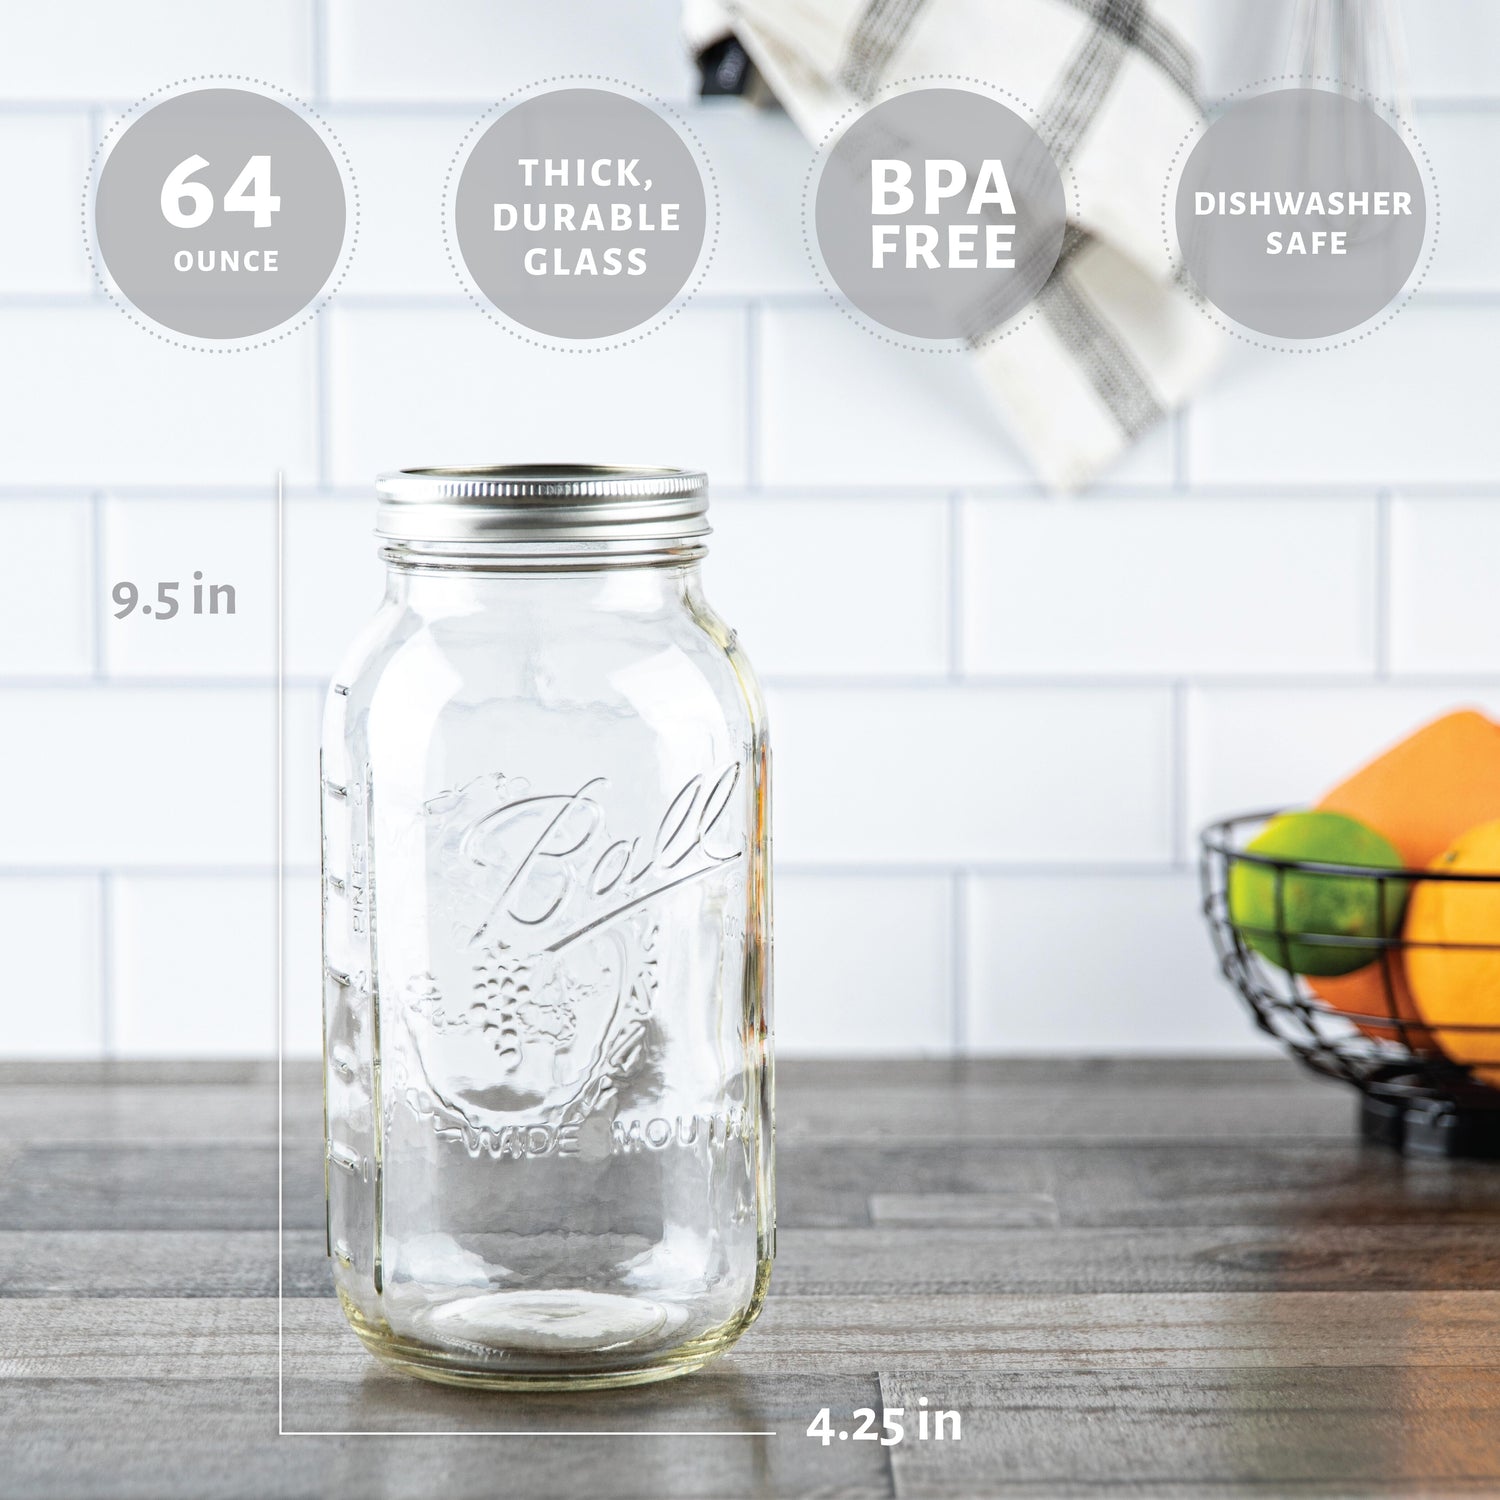 kitchentoolz 1 Gallon Extra Large Glass Mason Jar - Wide Mouth with  Airtight Lid - Safe Container for Fermenting, Pickling, and Storing